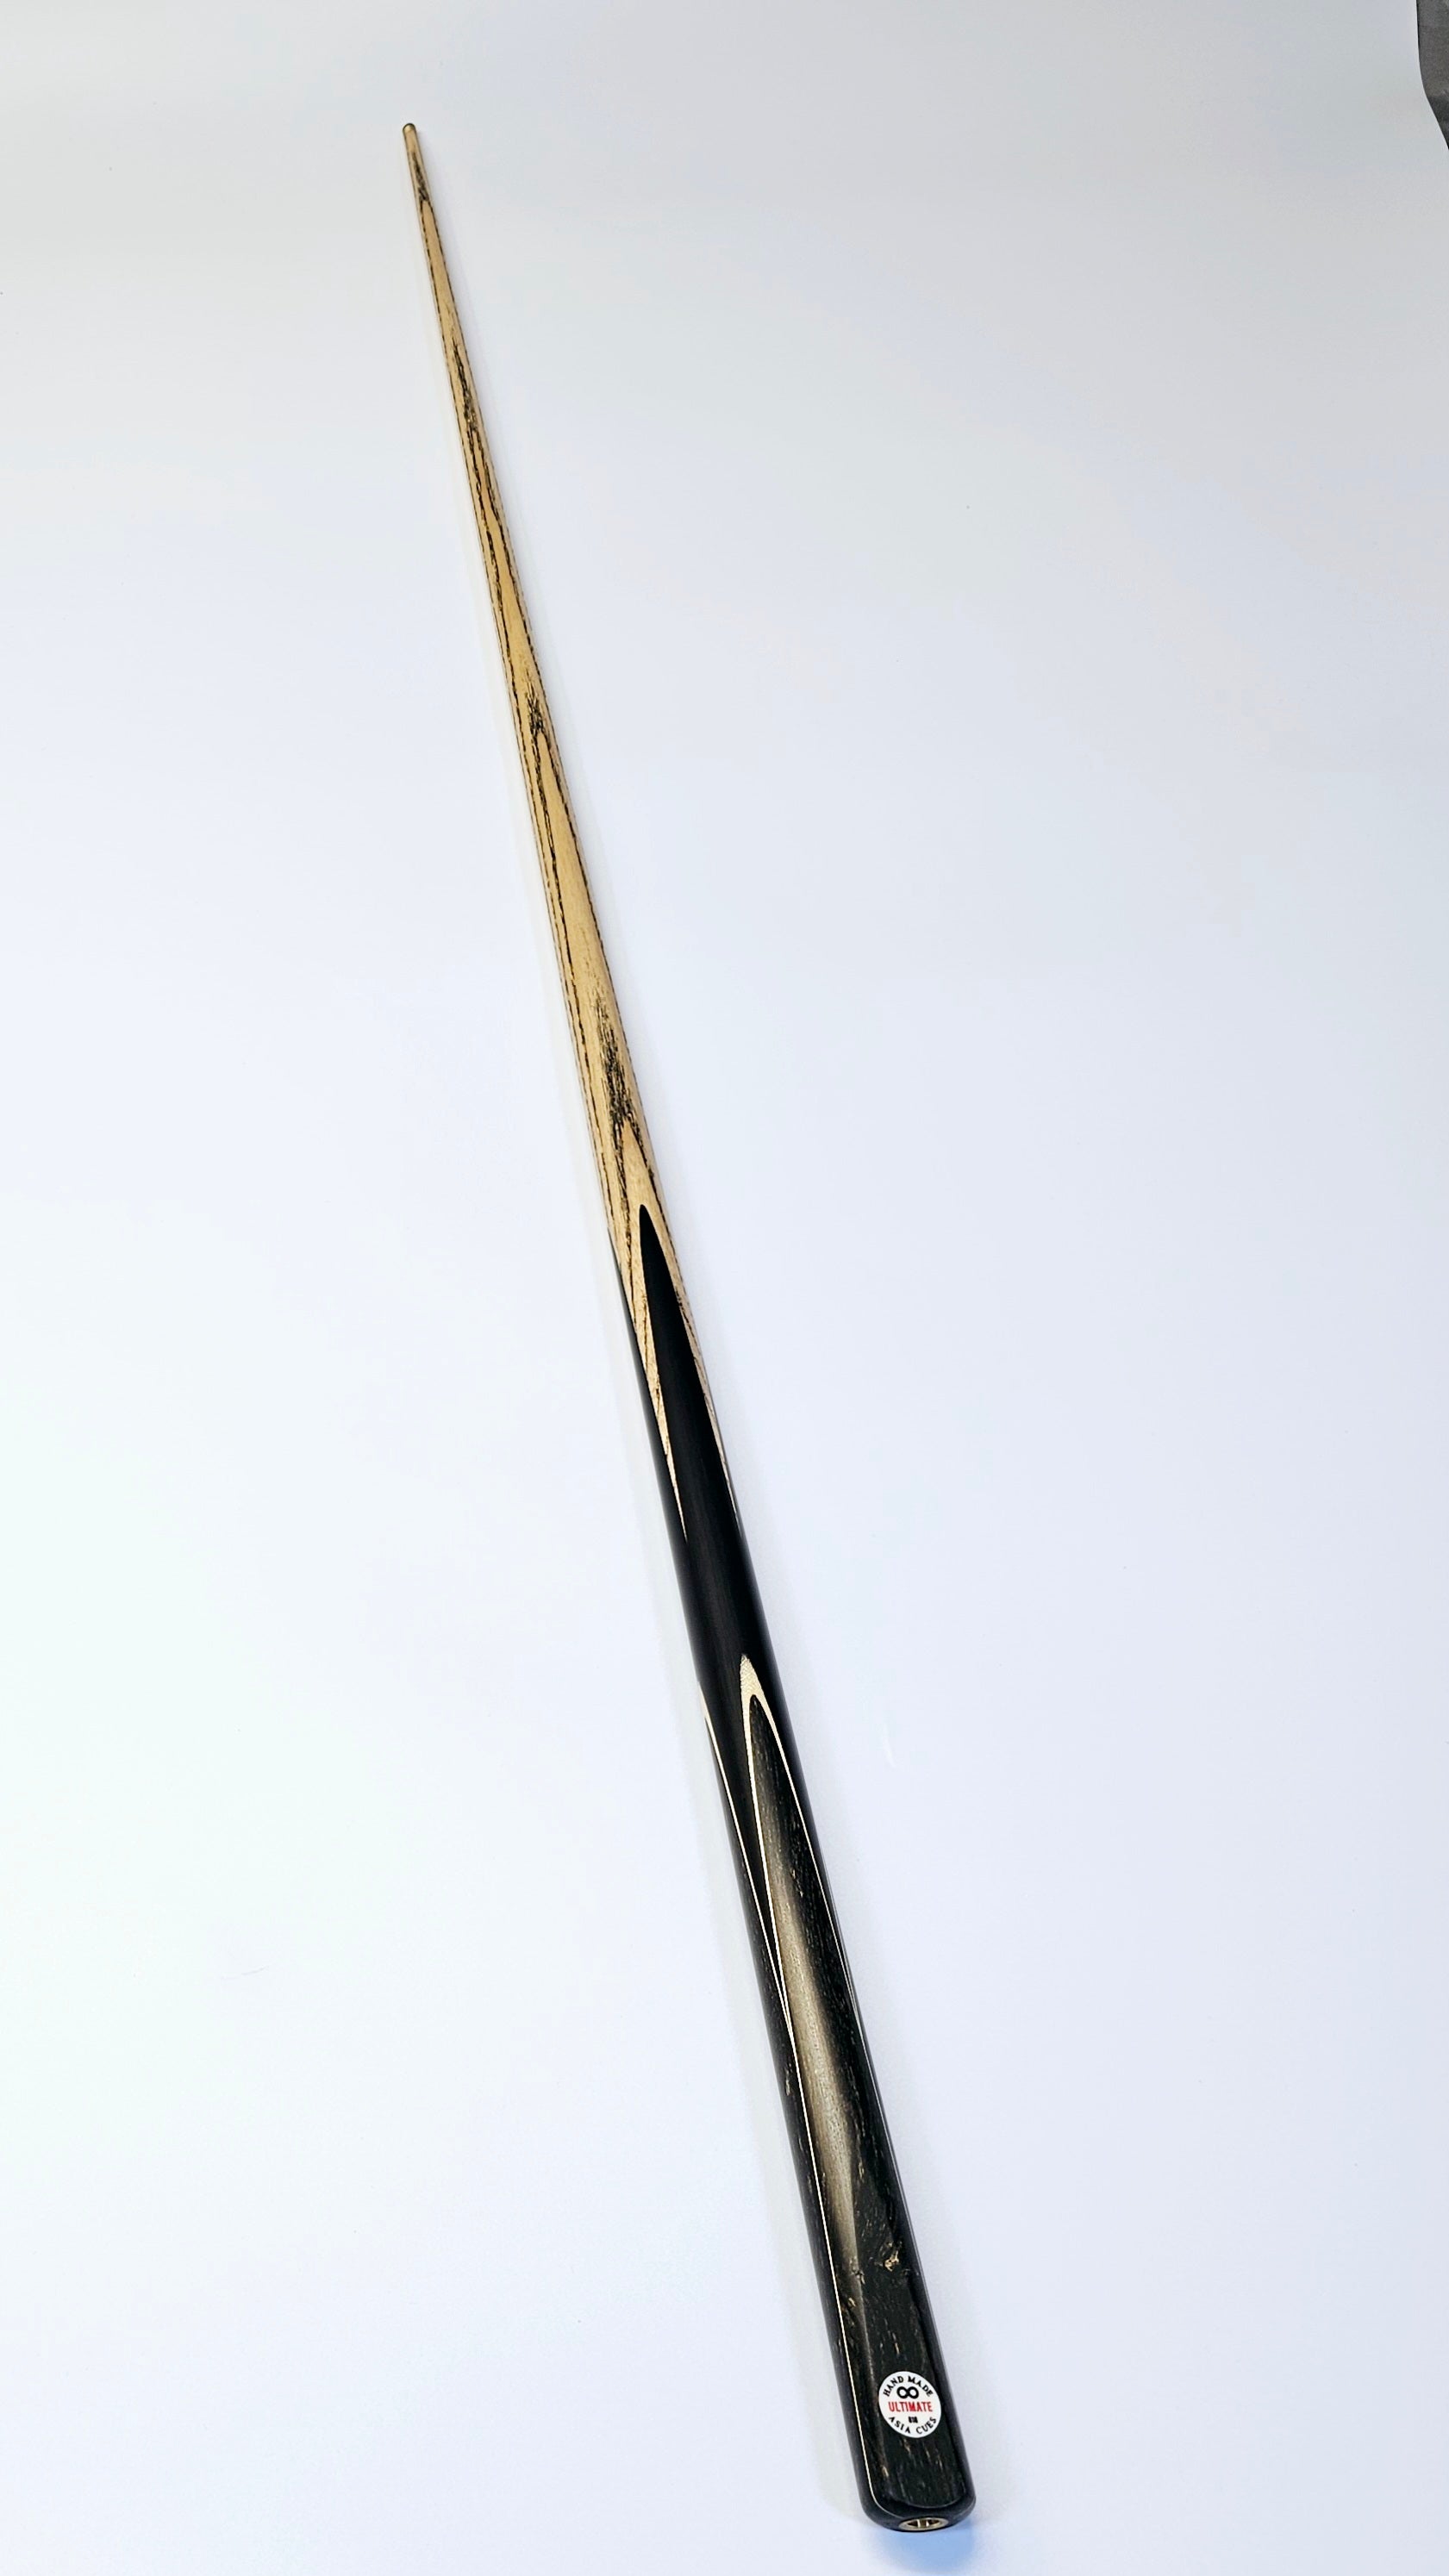 Asia Cues Ultimate No.818  - One Piece Snooker Cue 9.6mm Tip, 17.9oz, 57"